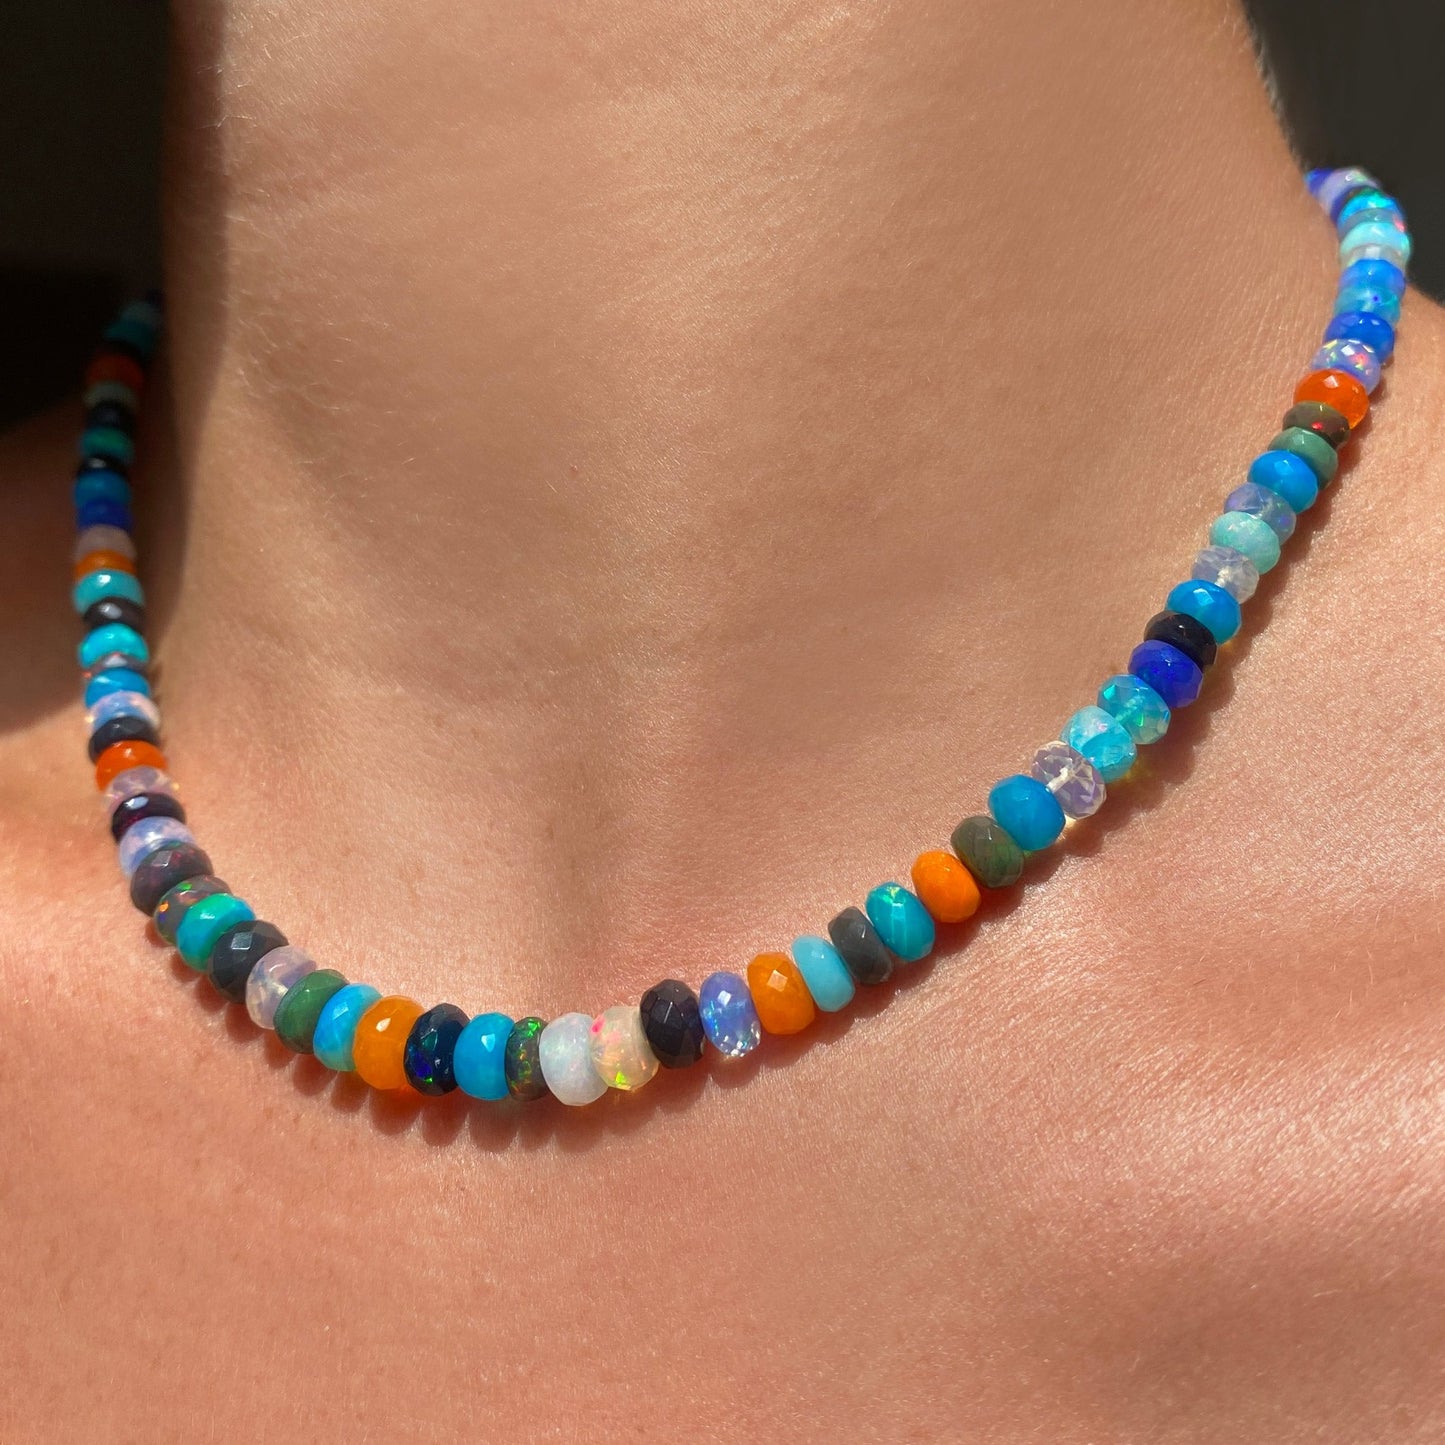 Shimmering beaded necklace made of faceted opals in shades of fiery blues, greens, teal, black, orange, and clear on a gold linking ovals clasp. 